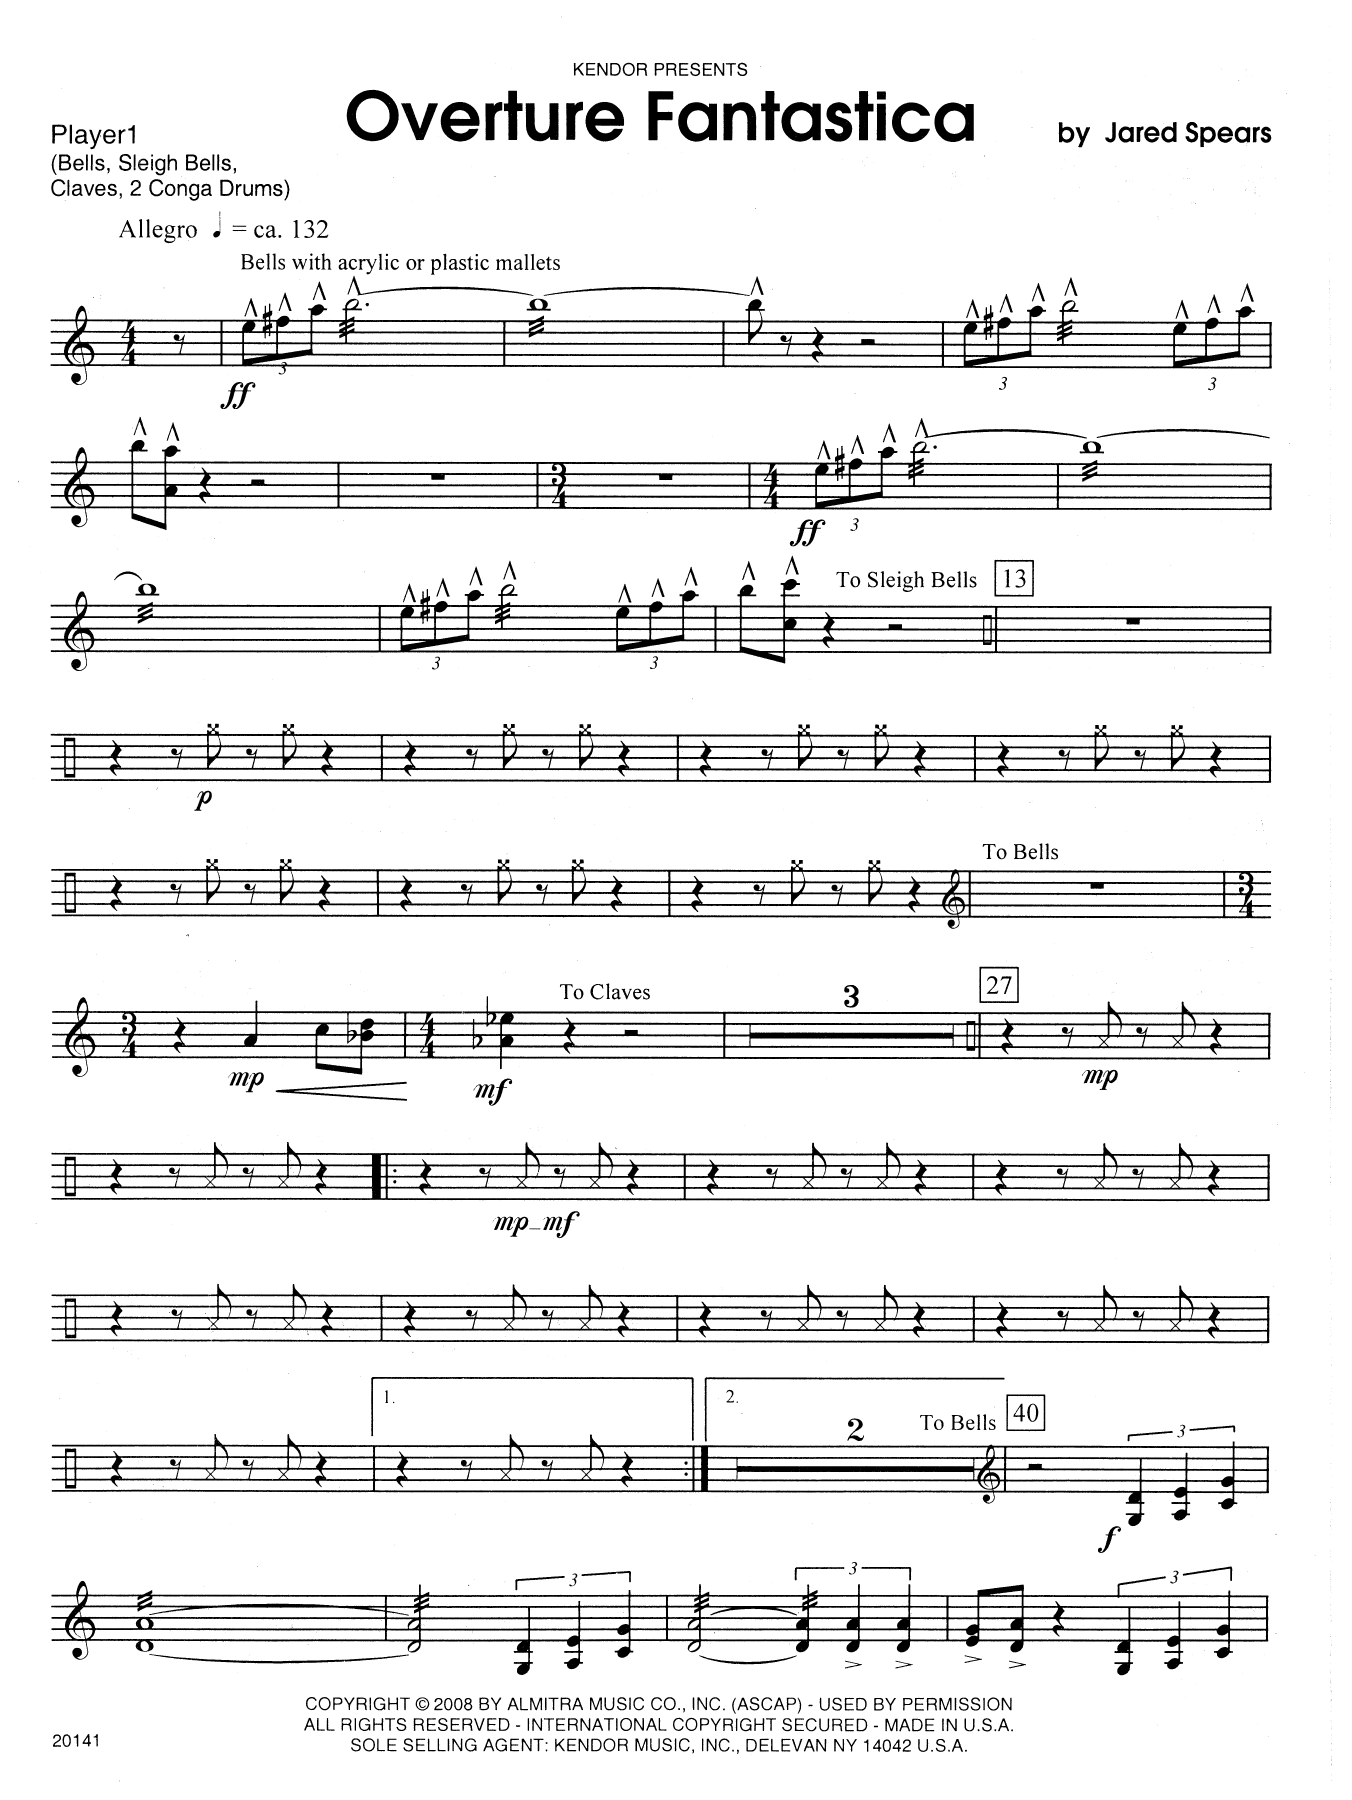 Download Jared Spears Overture Fantastica - Percussion 1 Sheet Music